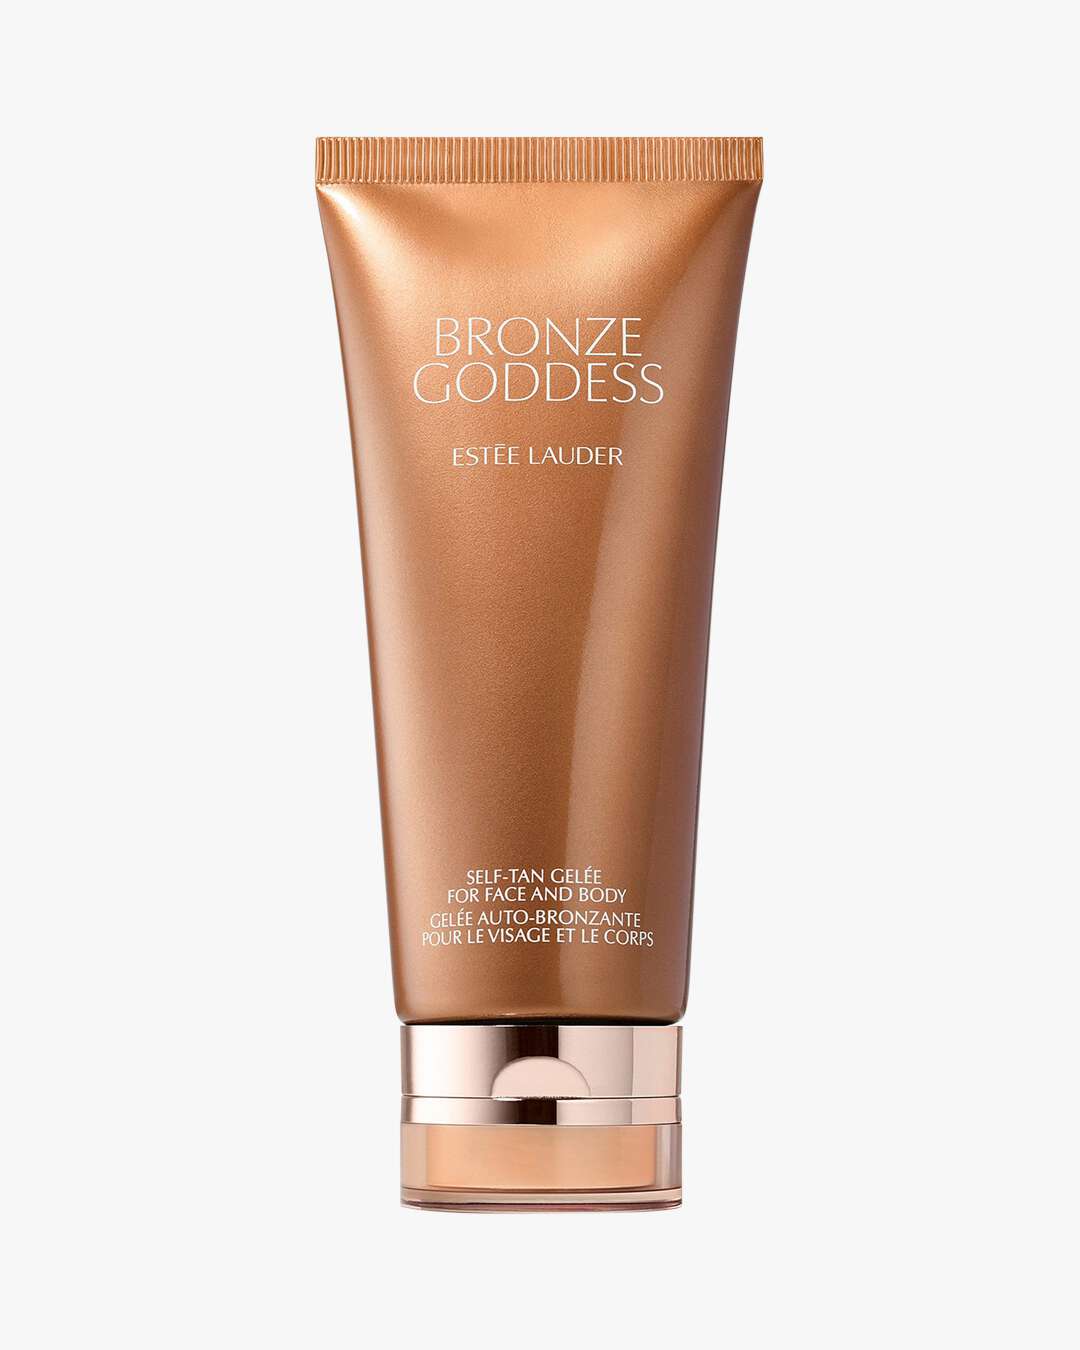 Bronze Goddess Self Tan Gelee For Face And Body 190 ml